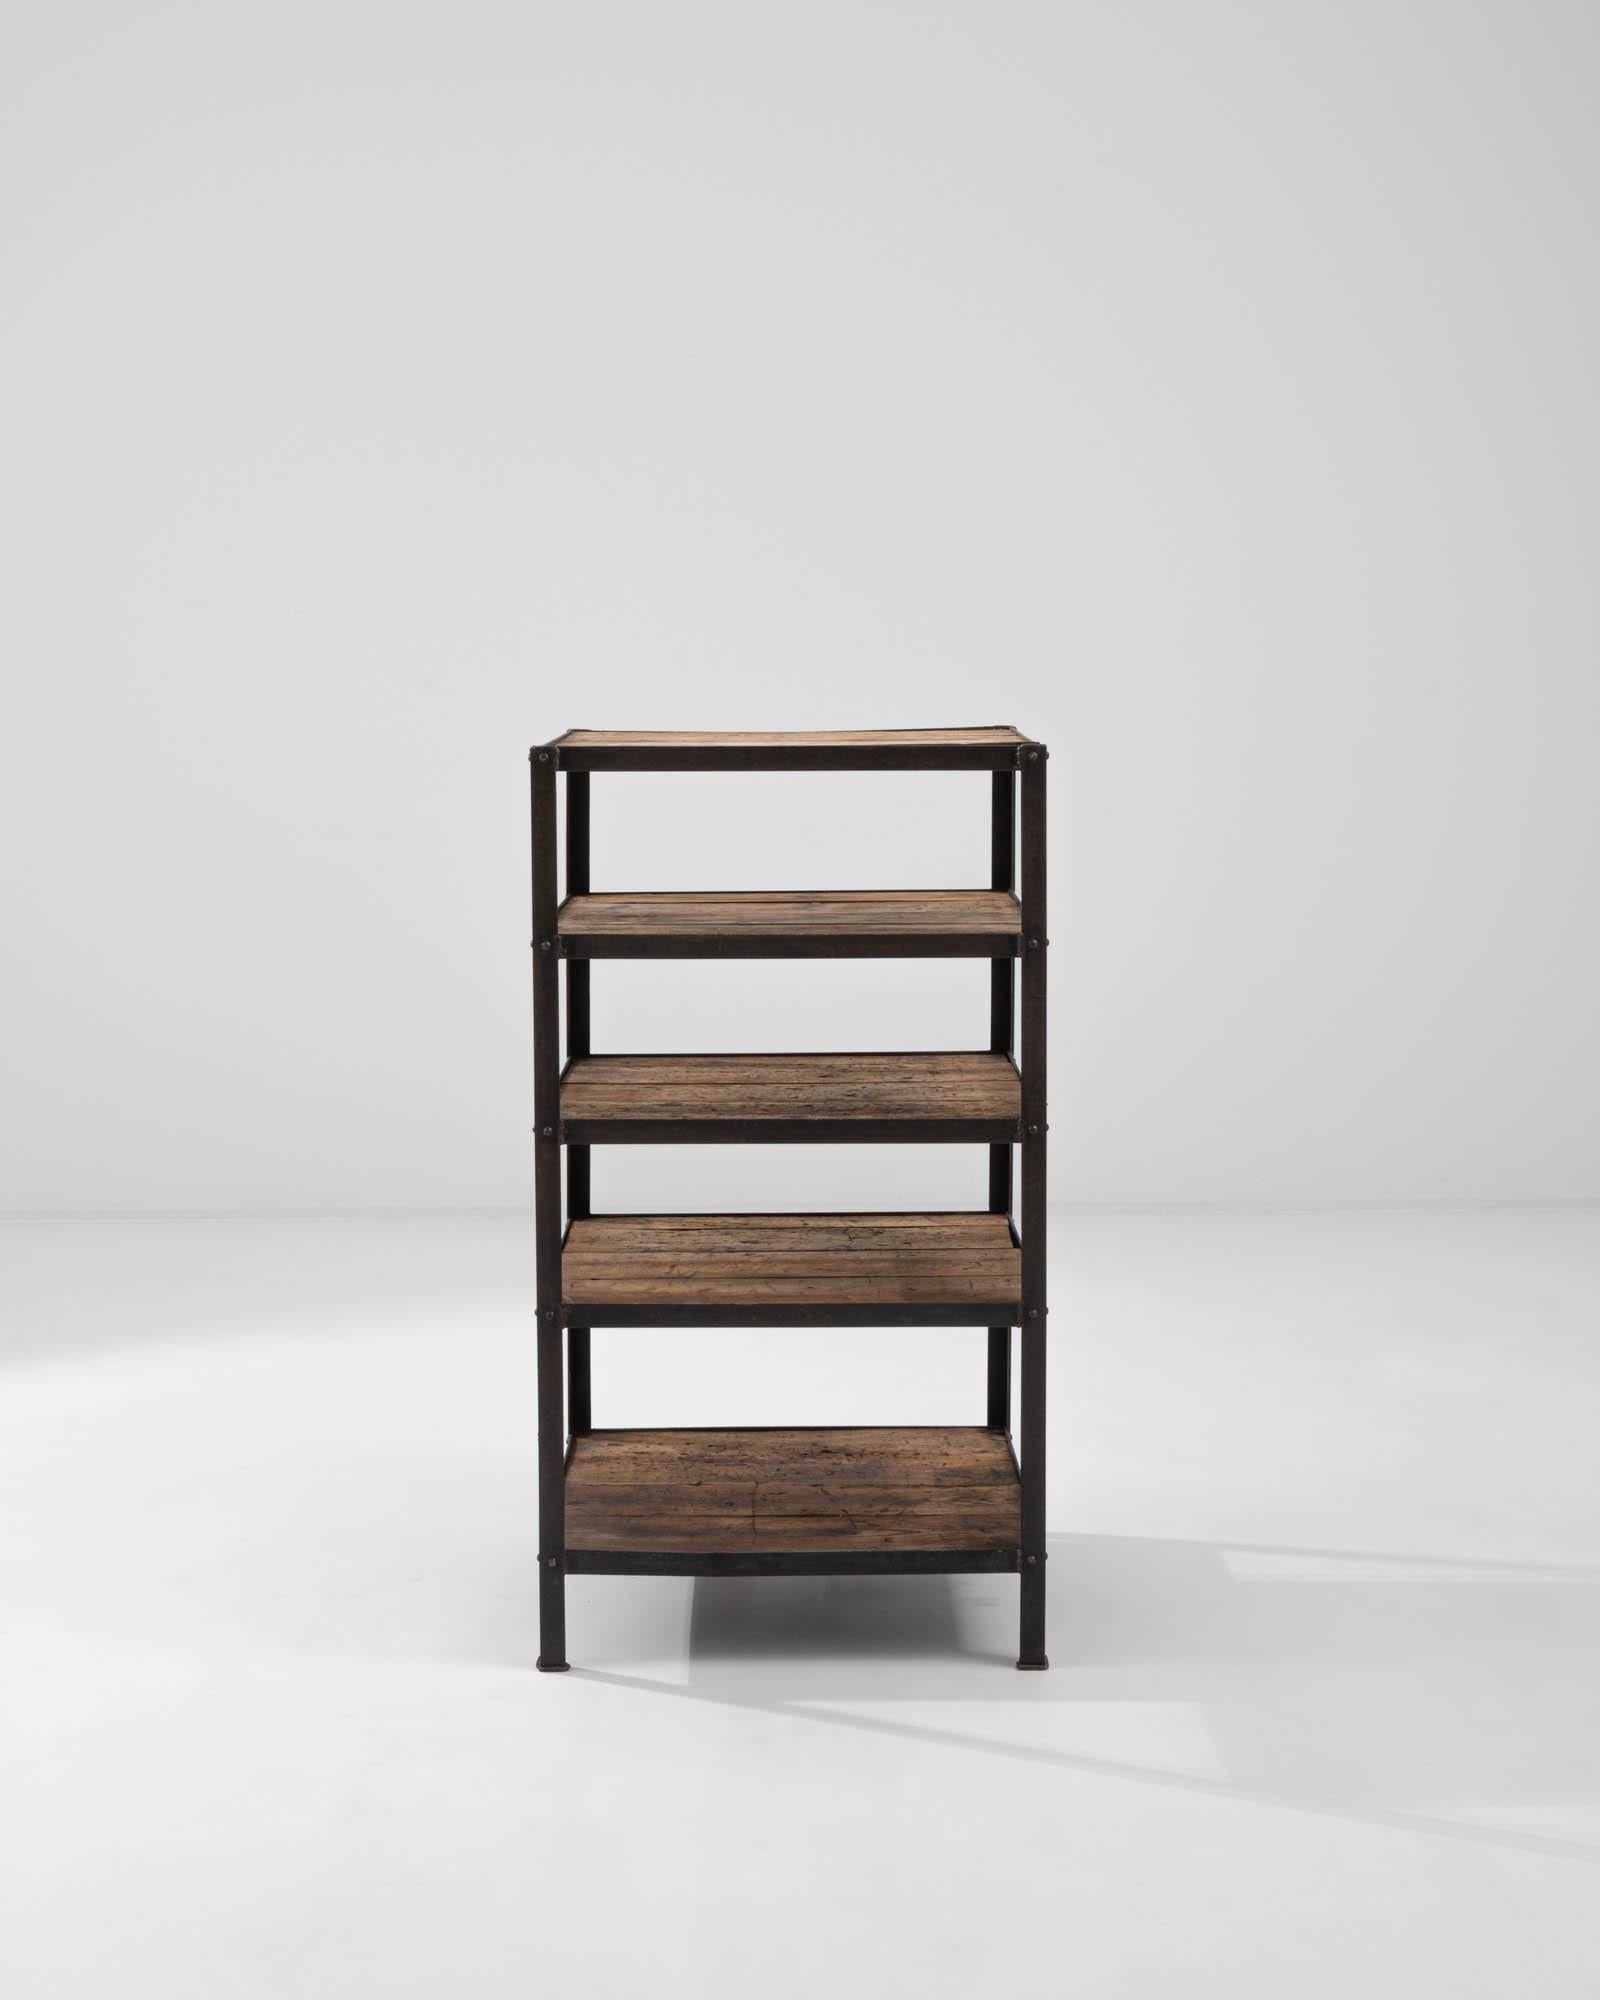 A wooden and metal shelf created in 20th century France. Industrial, yet surprisingly homey, this sturdy set of shelves emits an orderly and approachable aura. Forthright in its design, the five equally sized shelves offer a wealth of storage space.